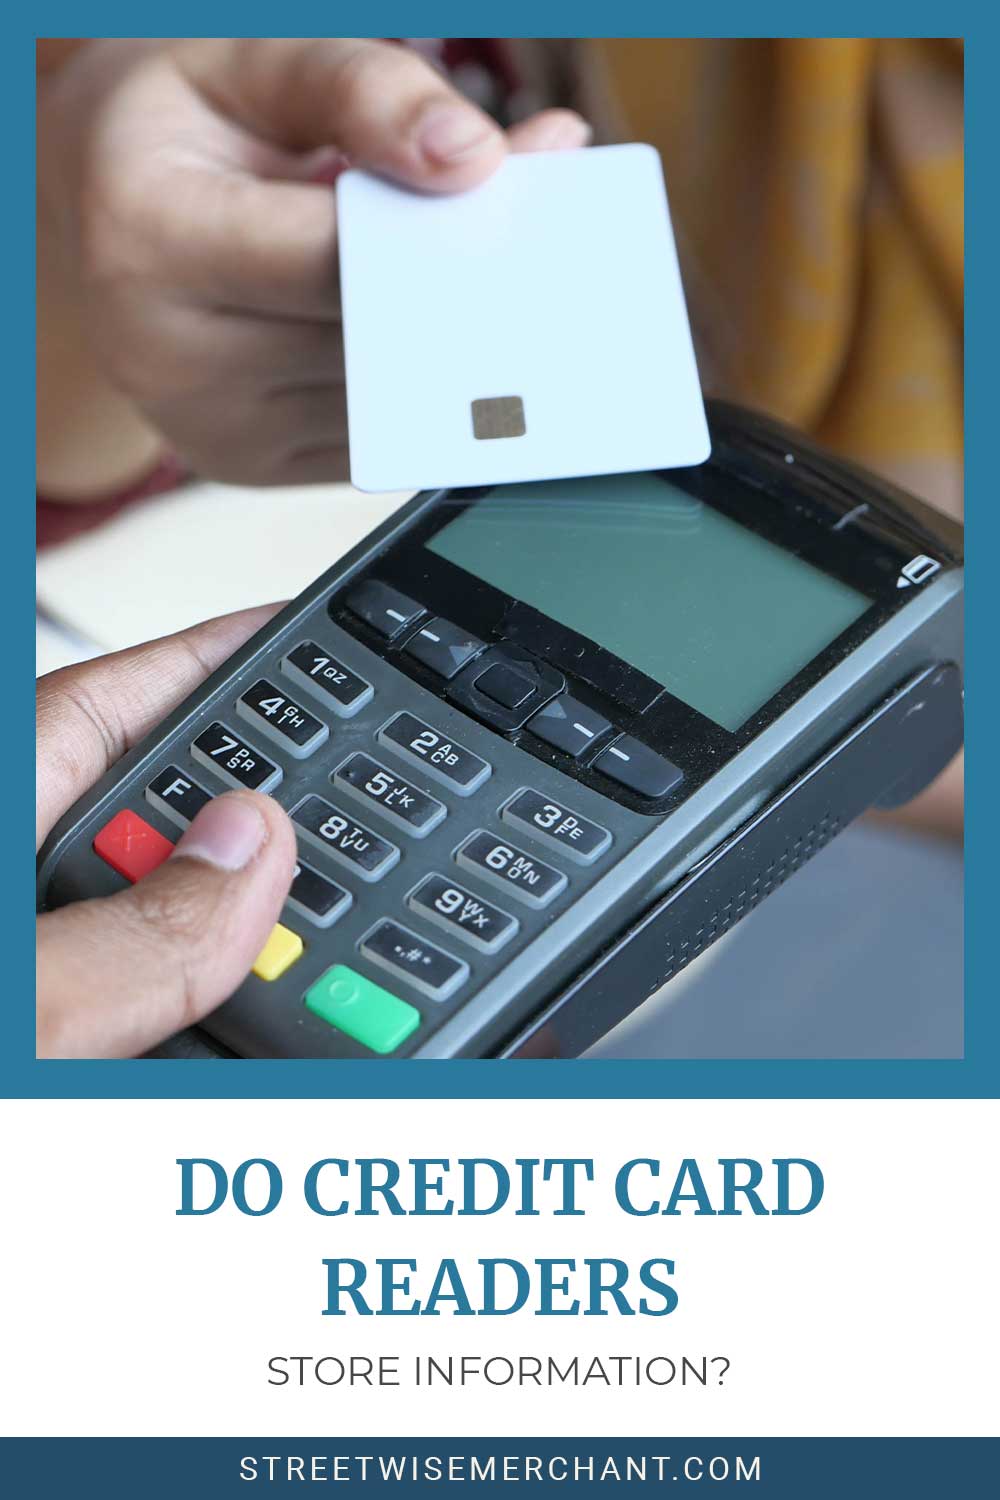 Man holding credit card machine and another person giving him card - Do Credit Card Readers Store Information?